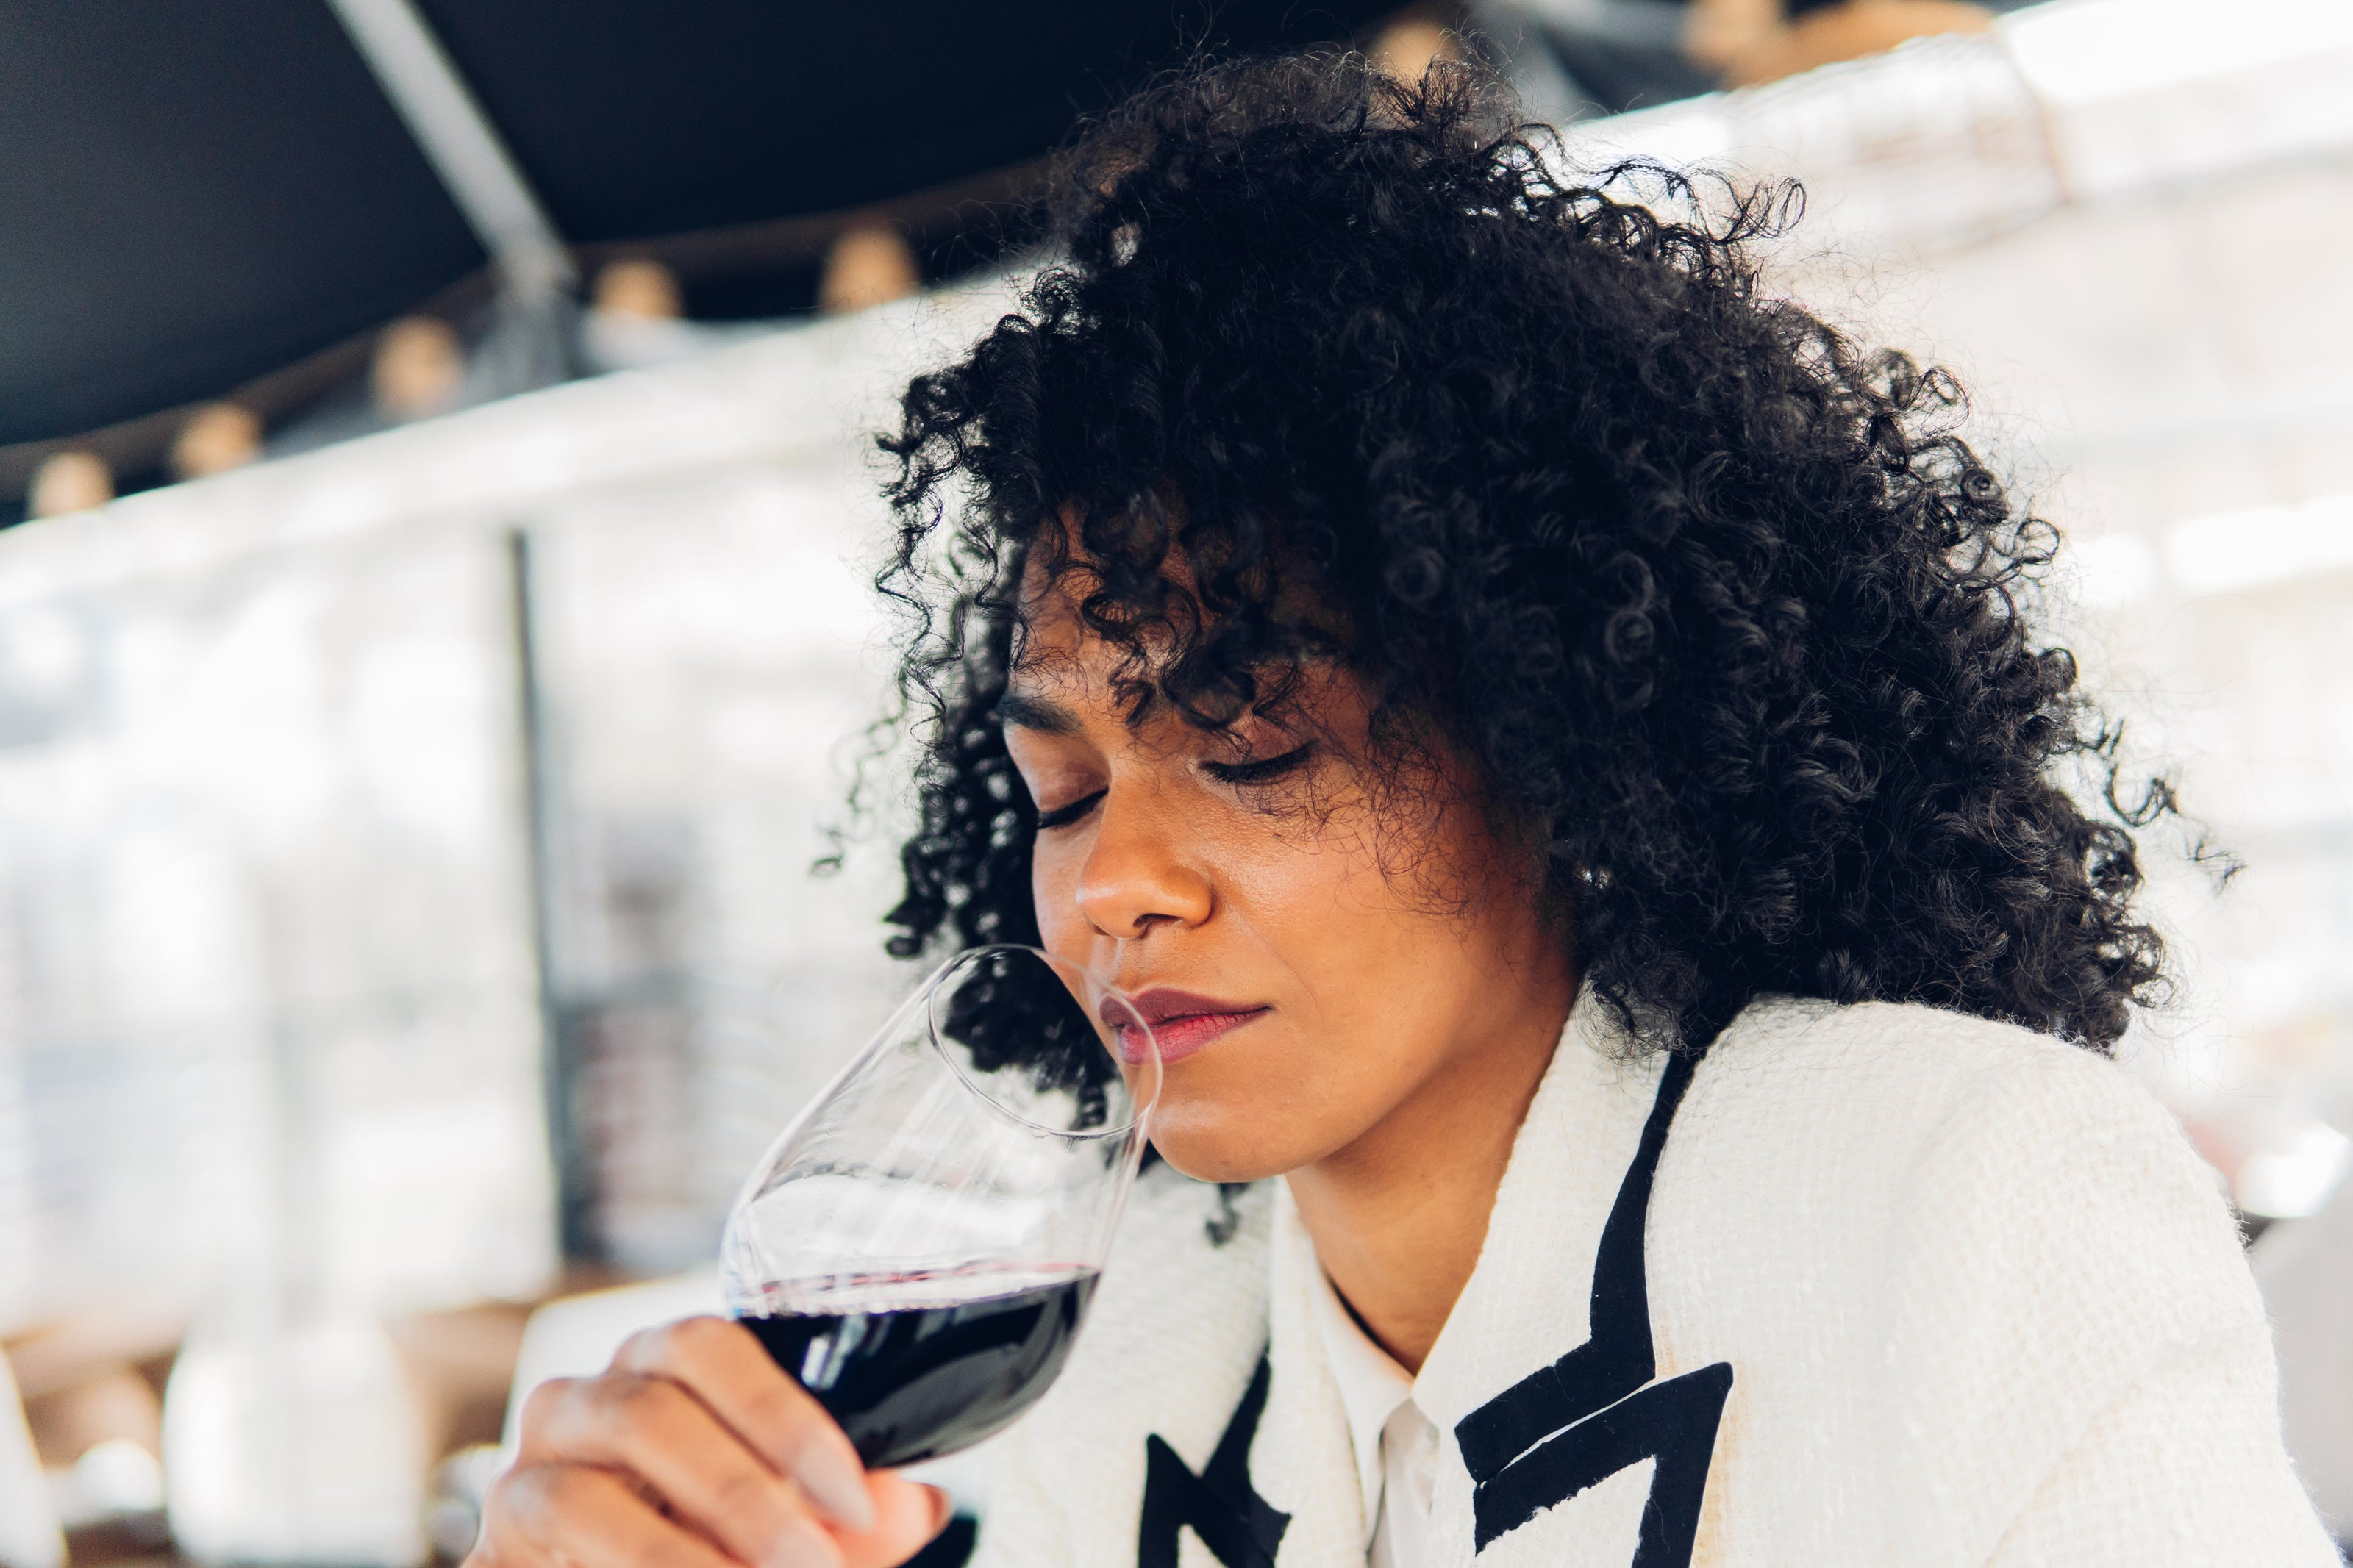 Highlighting Black-Owned Wine Brands and Black Winemakers